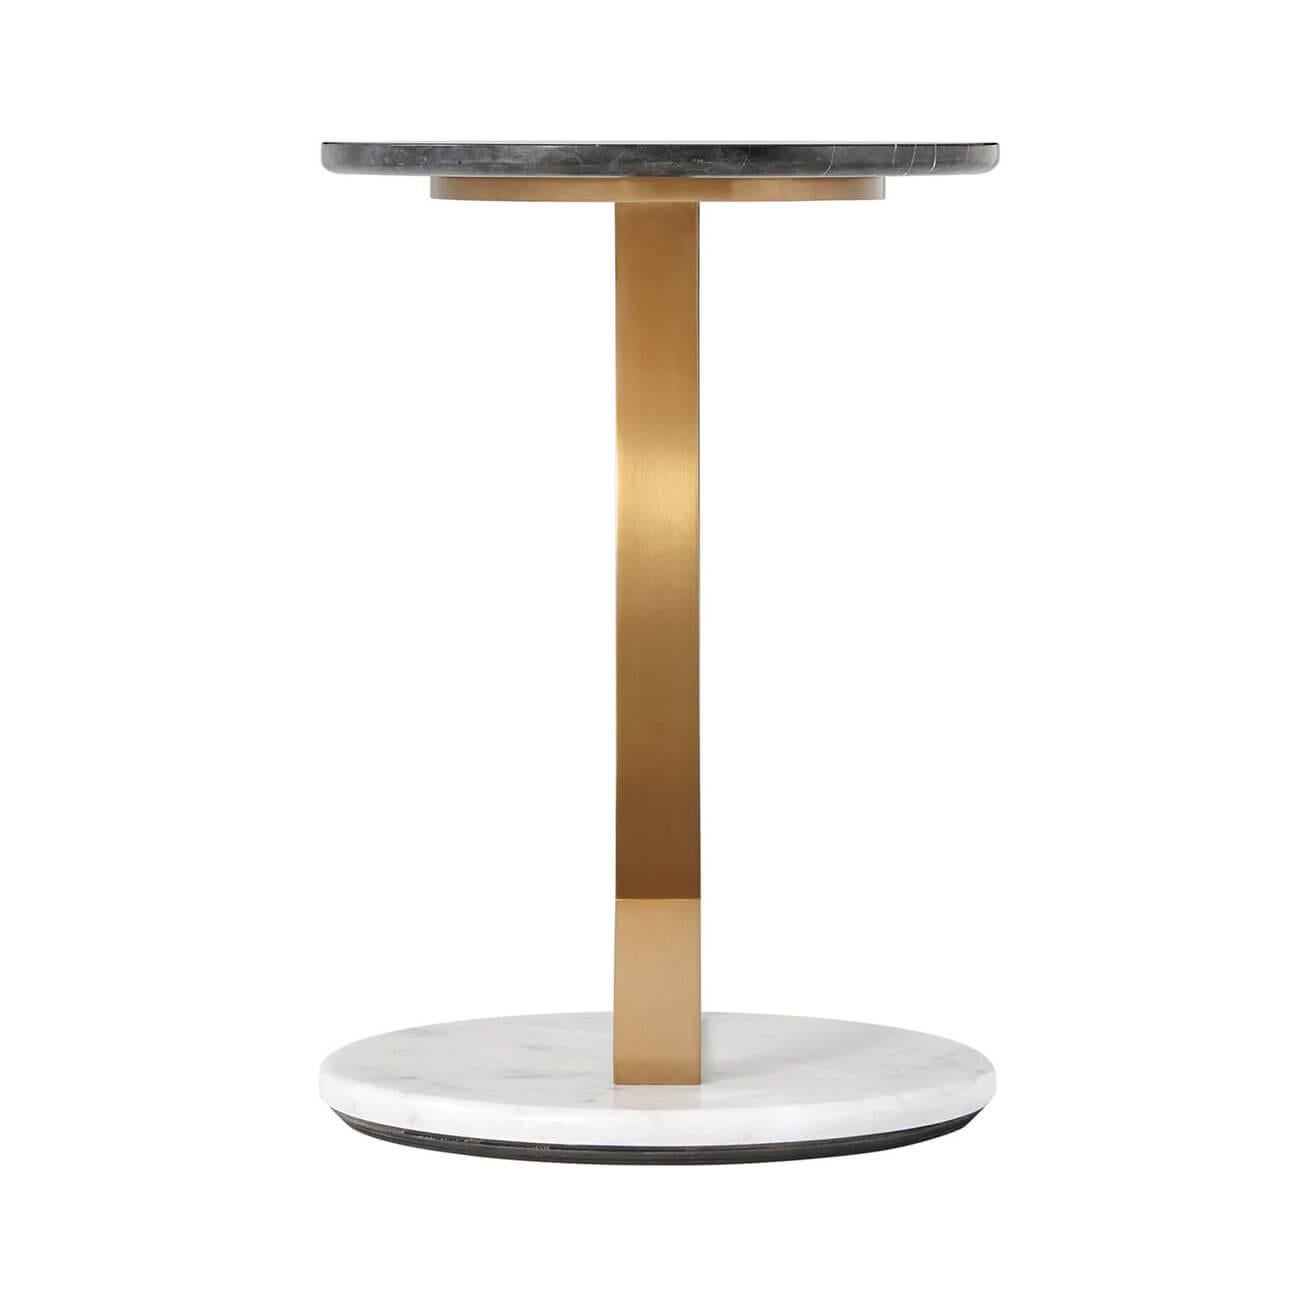 A Modern marble and brass side table with a black marble top and white marble base with a brass support in the form of an open sail.
Dimensions: 15